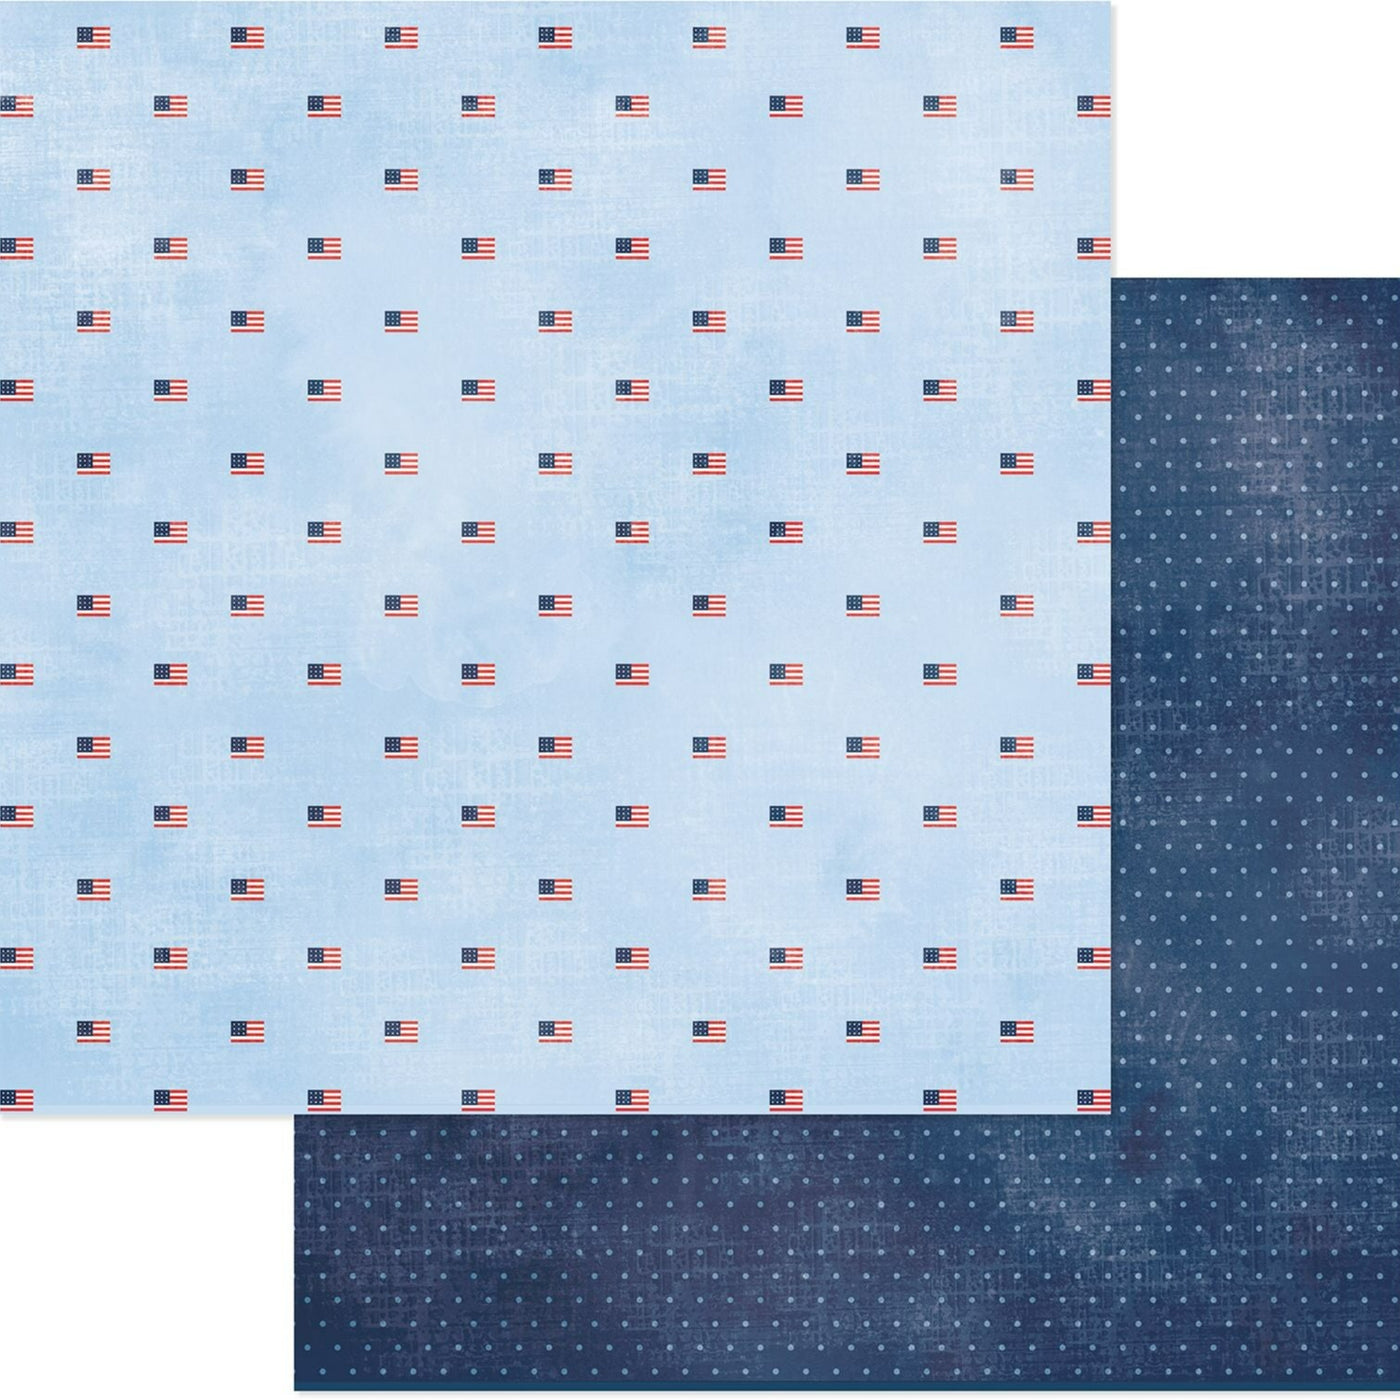 12x12 double-sided patterned paper. (Side A - rows of small American flags on a light blue background. Side B - light blue dots on a navy blue background) - American Crafts